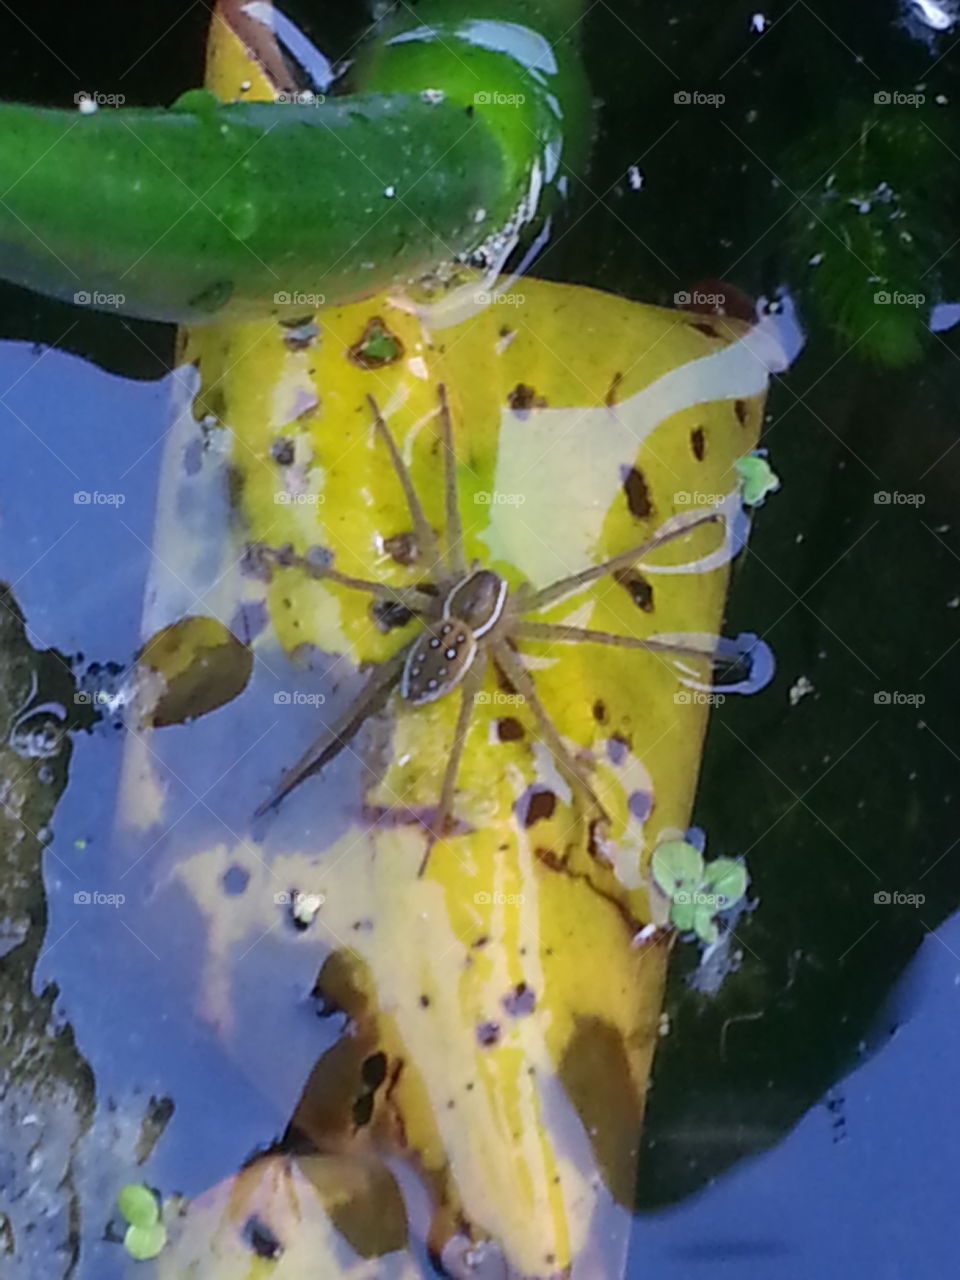 creepy spider. took while fishing